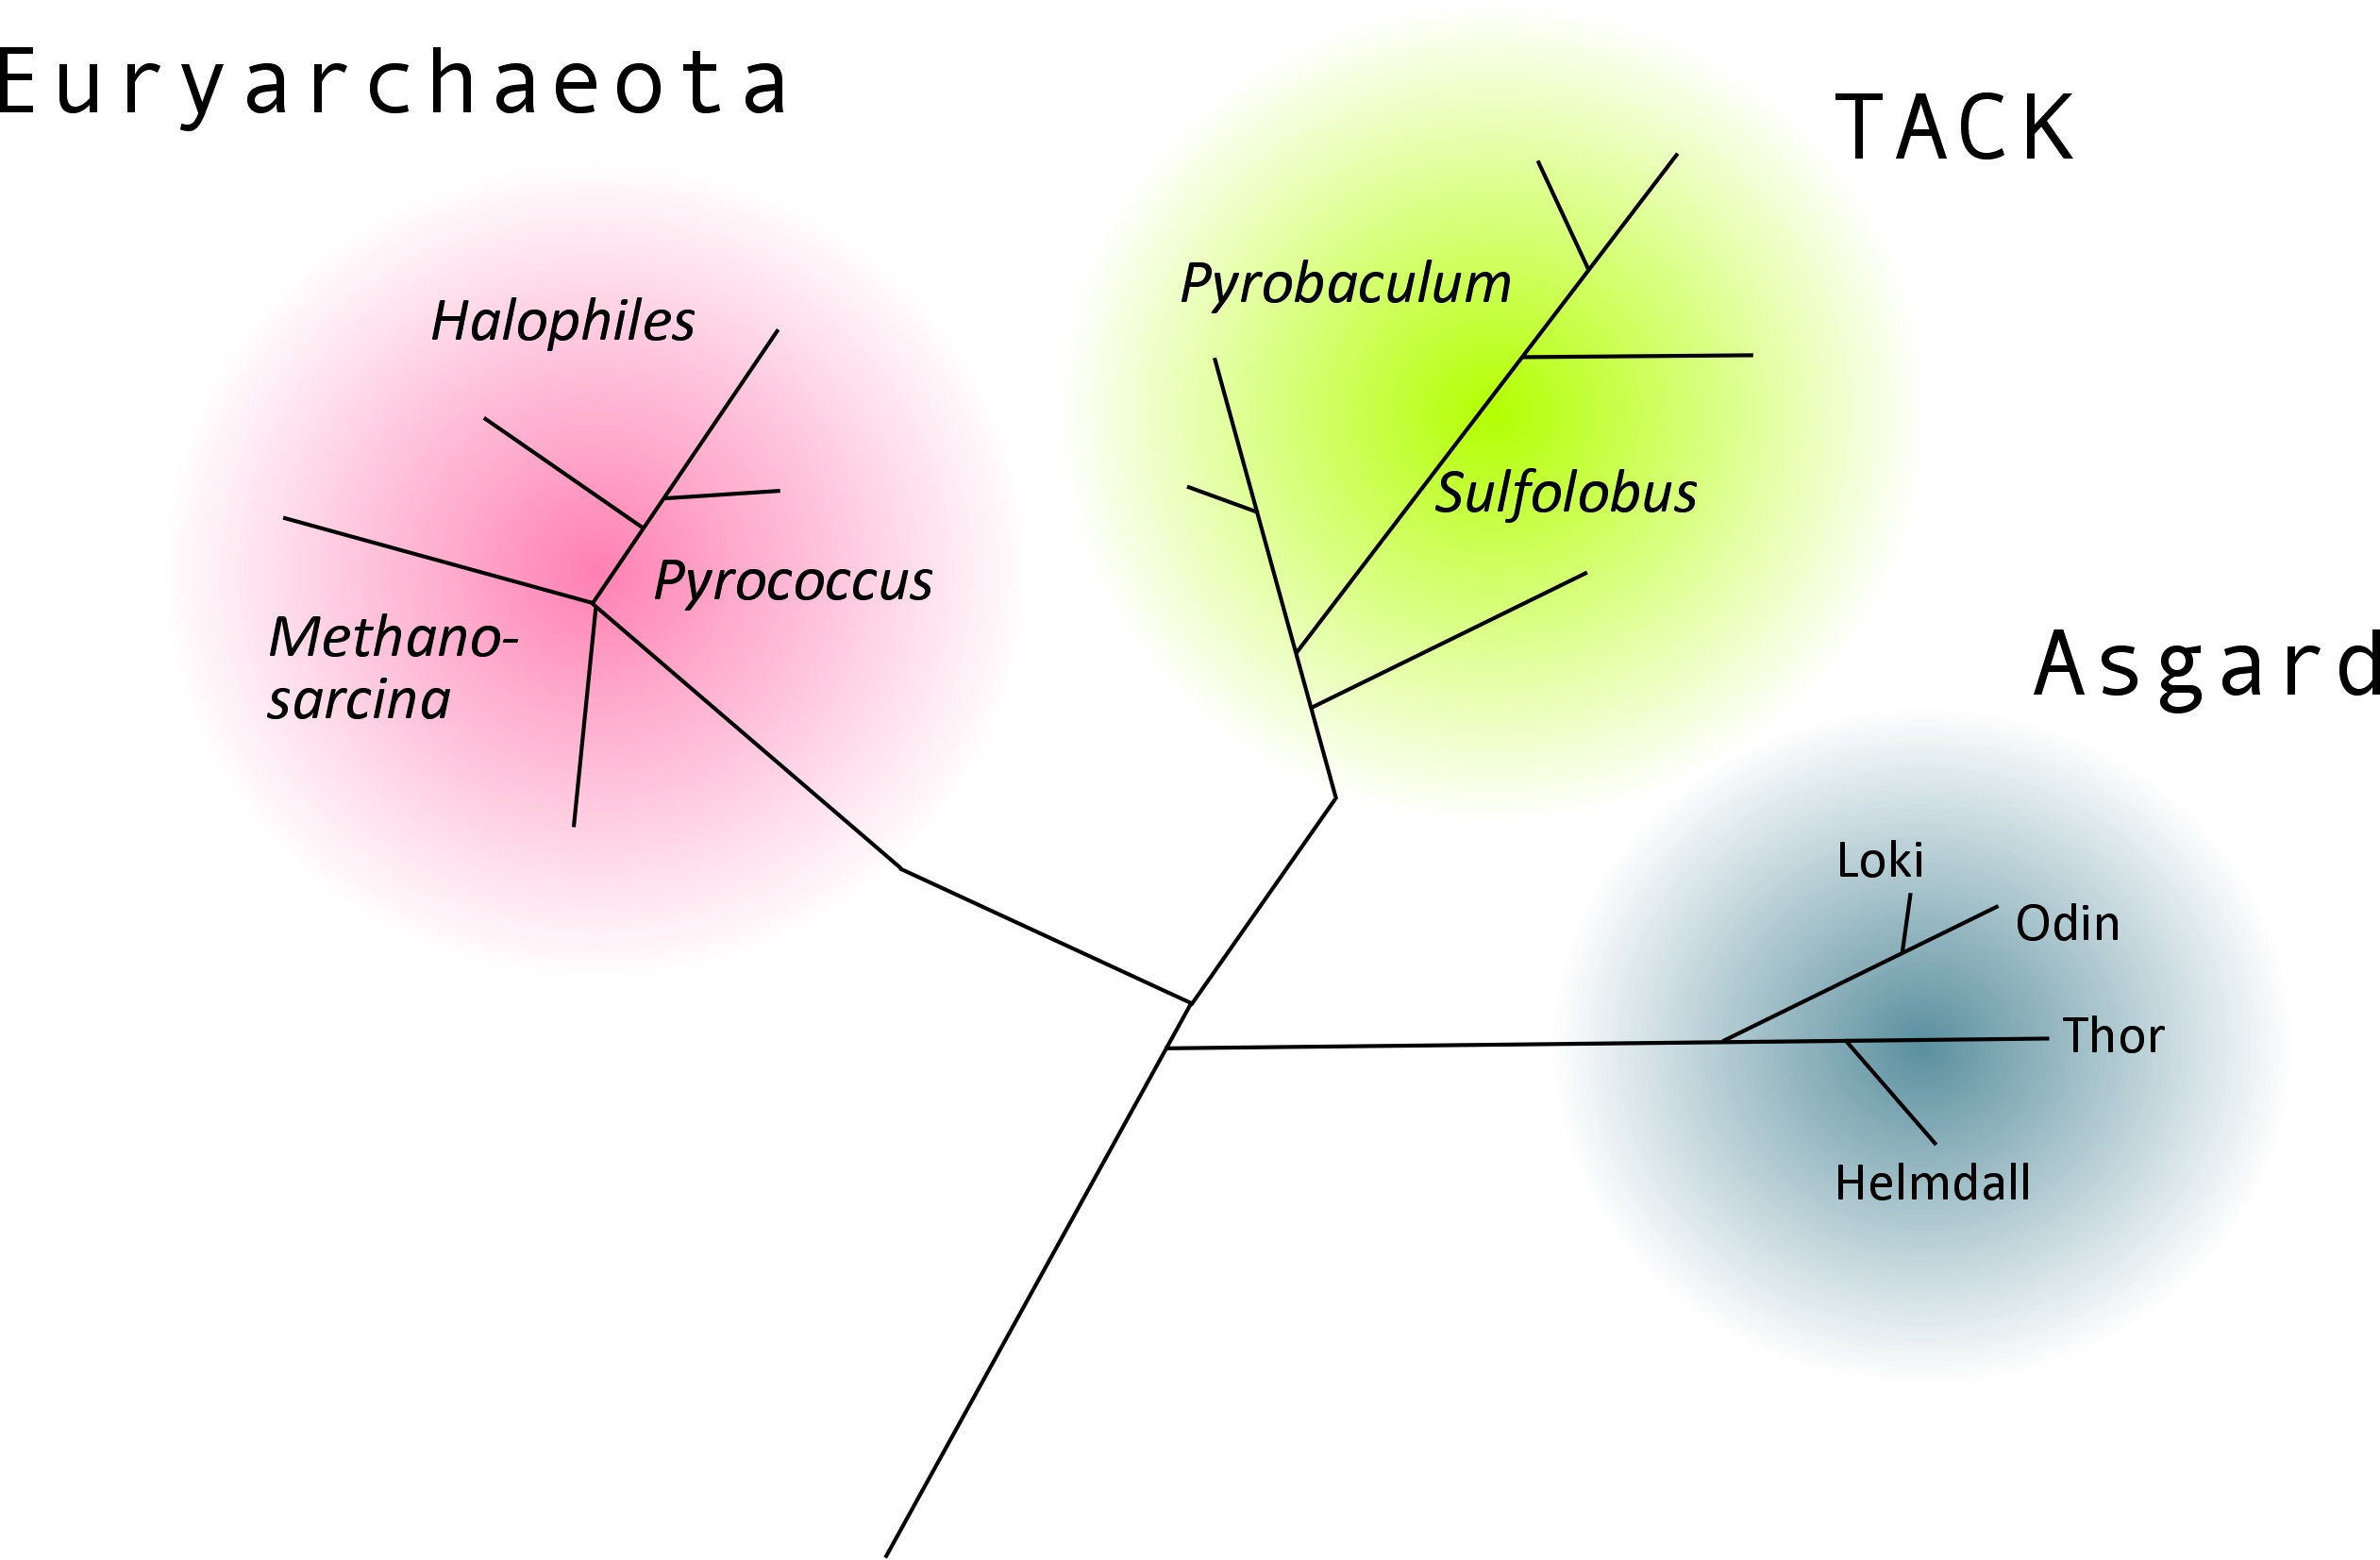 The picture shows the domain Archaea, which is subdivided into different phyla: Euryarchaeota, TACK (containing Thaum-, Cren- and Korarchaeota) and Asgard archaea. Haloarchaea belong to the Euryarchaeota.